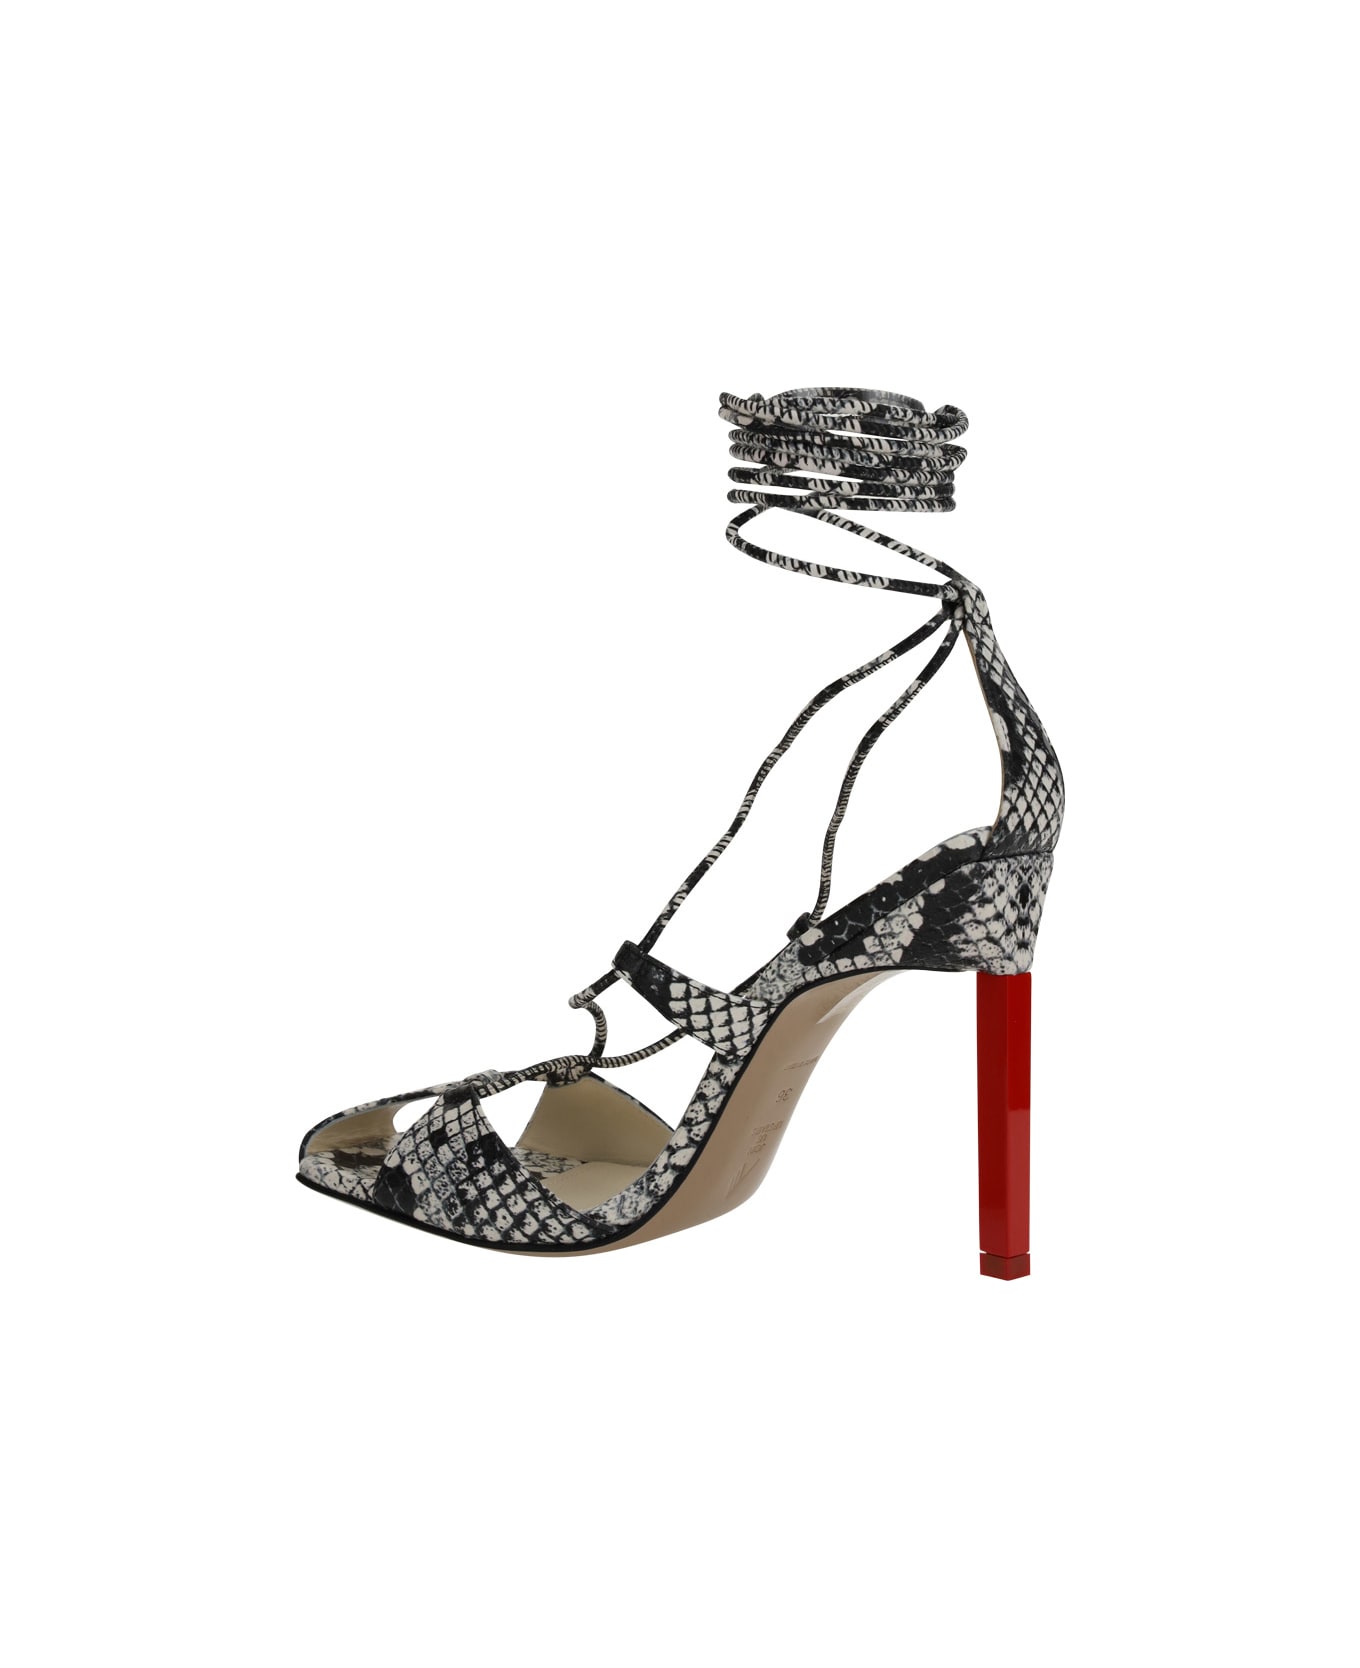 The Attico Snake Skin Laced Strap Sandals - White/Red